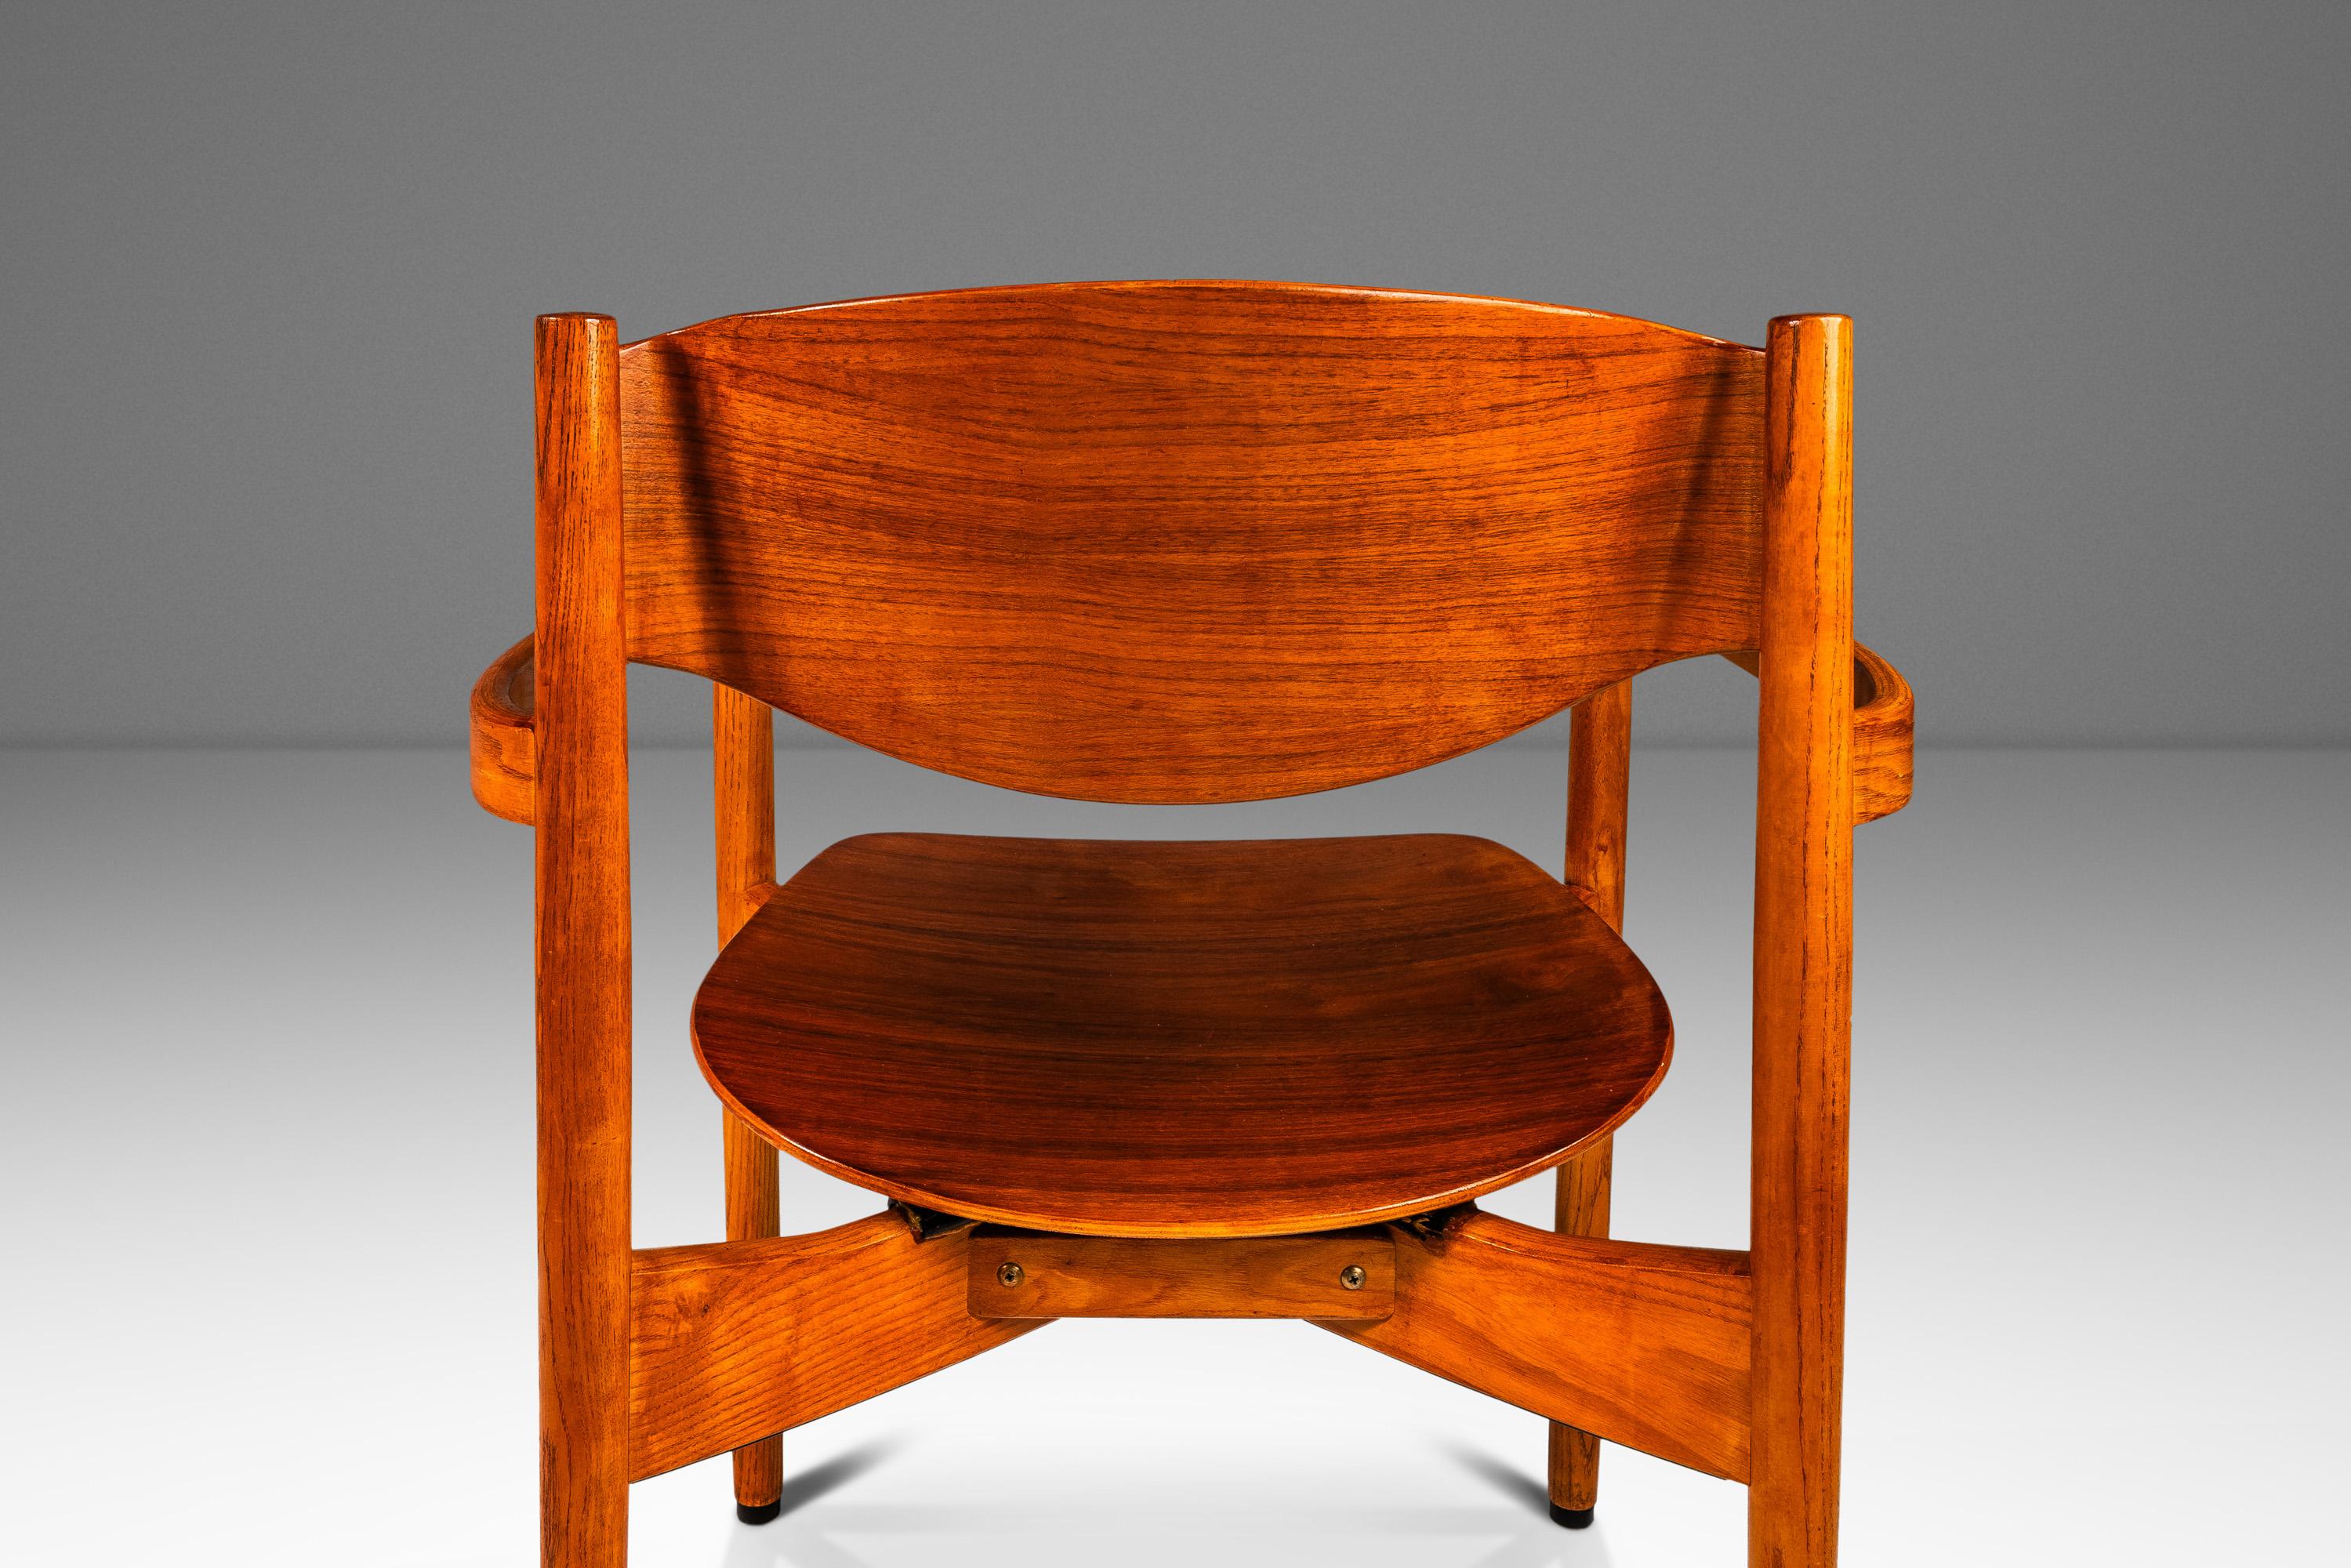 Set of 6 Stacking in Oak & Walnut Chairs by Jens Risom, USA, c. 1960s For Sale 8